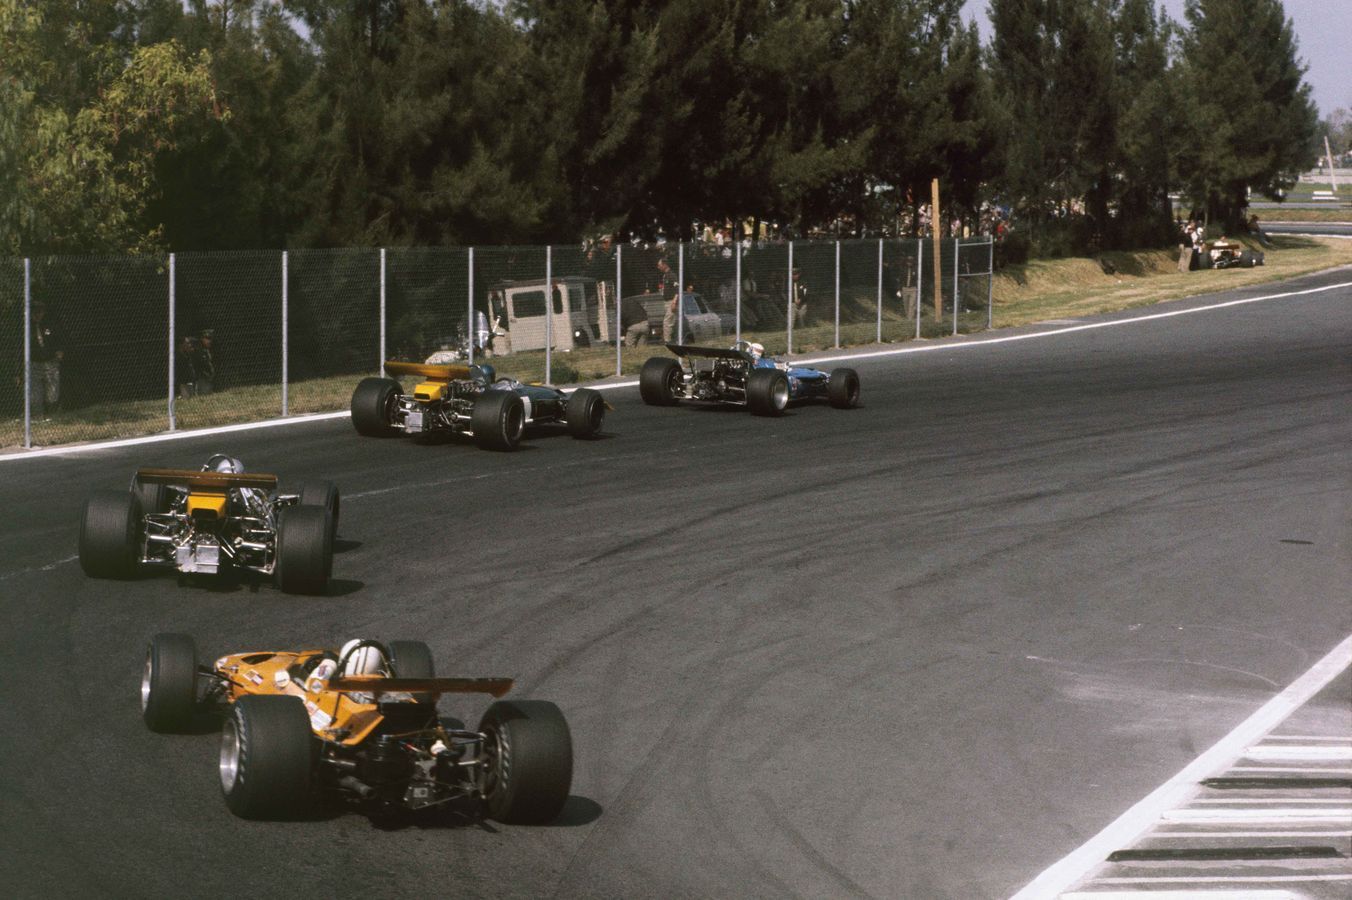 Denny Hulme in the McLaren M7A Ford, chasing down Jackie Stewart, Jacky Ickx, and Jack Brabham